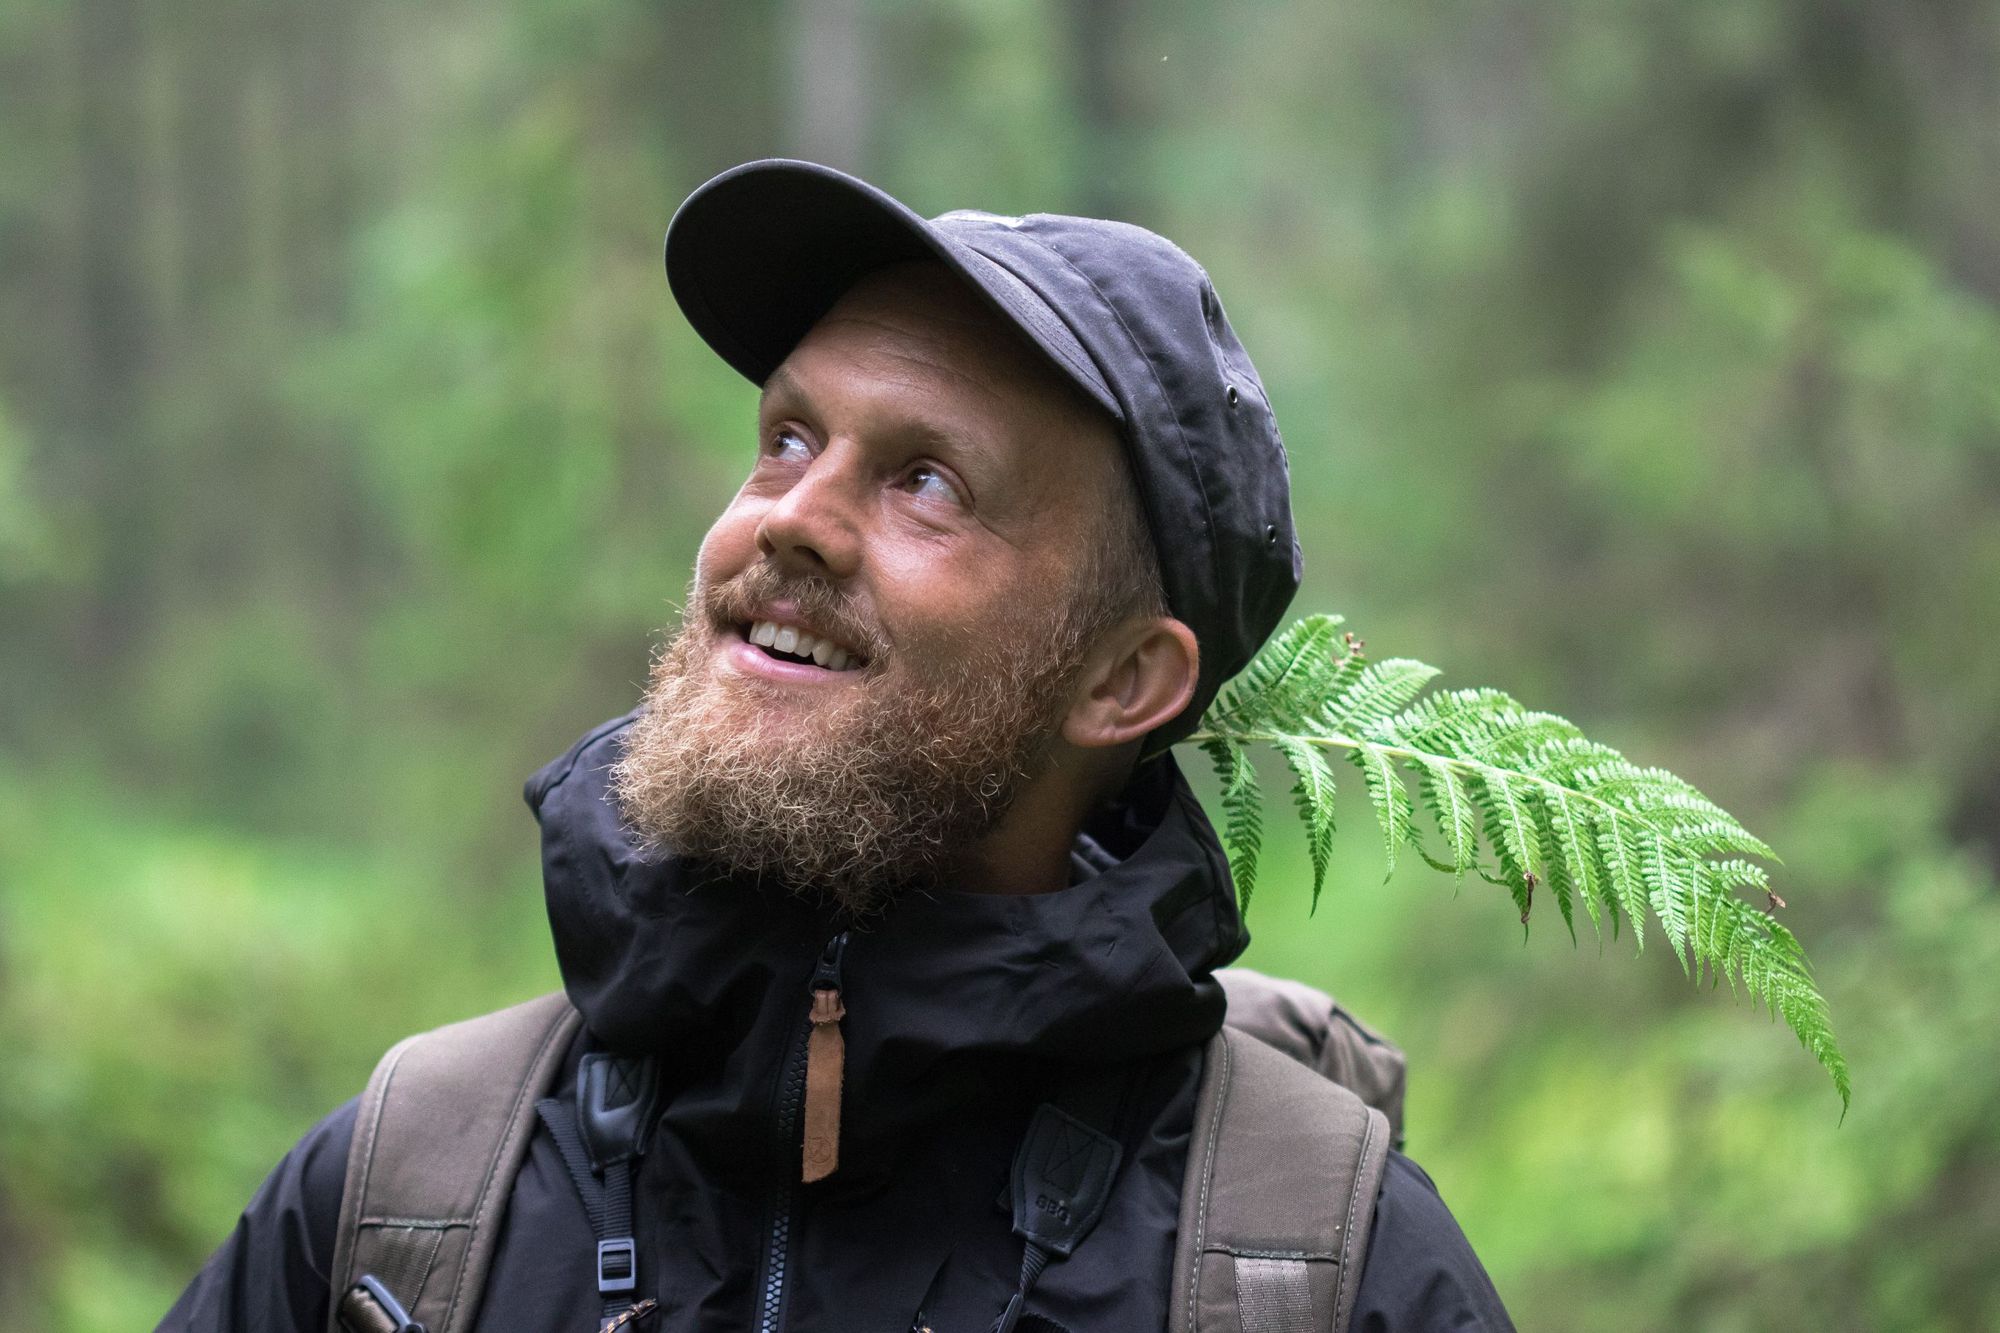 Marcus Eldh, the founder and owner of Wild Sweden. Photo: Simon Green